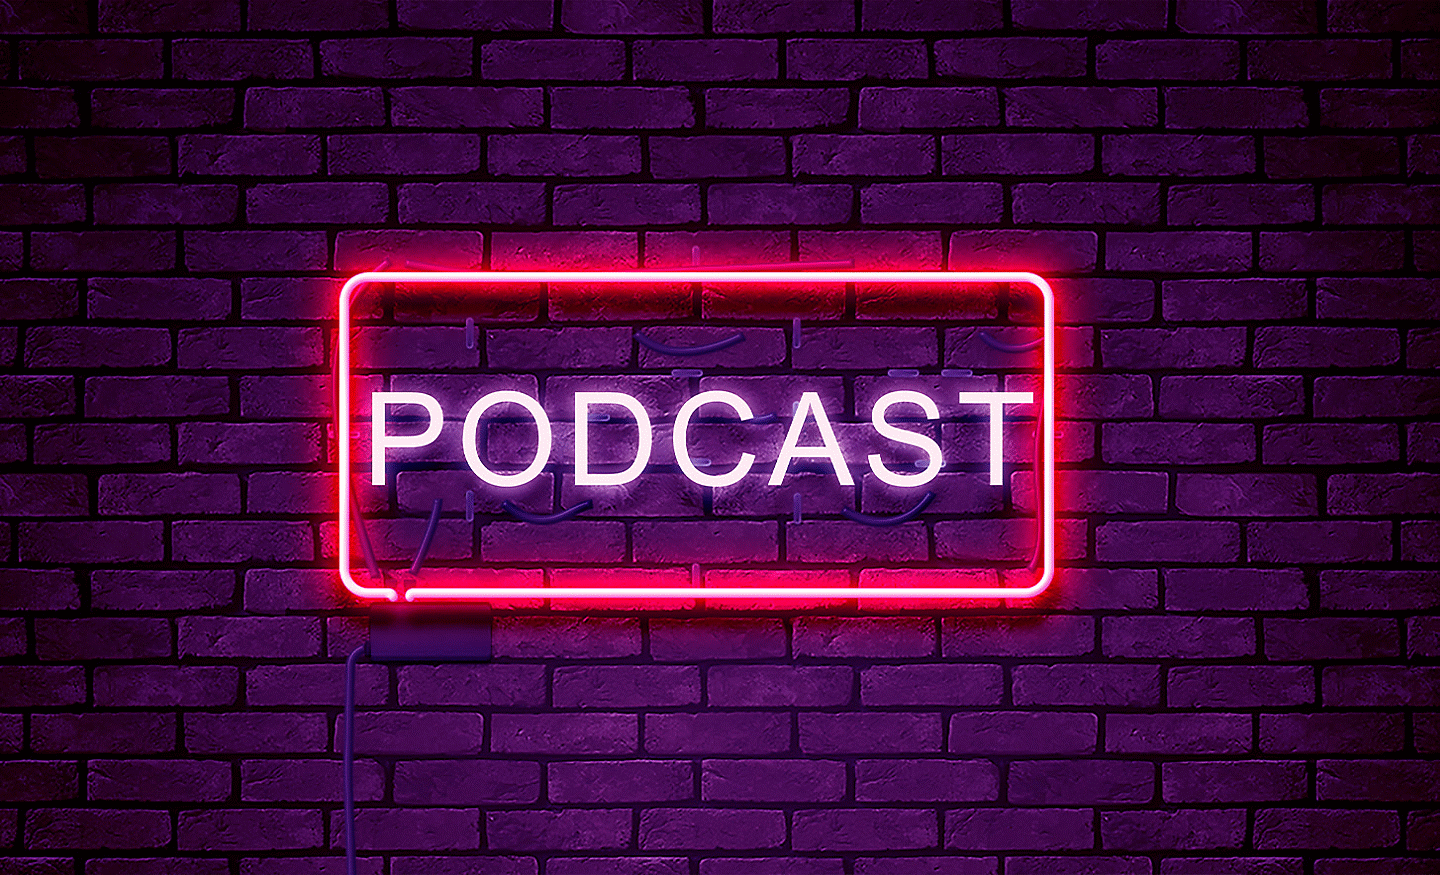 Image of the word PODCAST in a neon box on a purple brick background